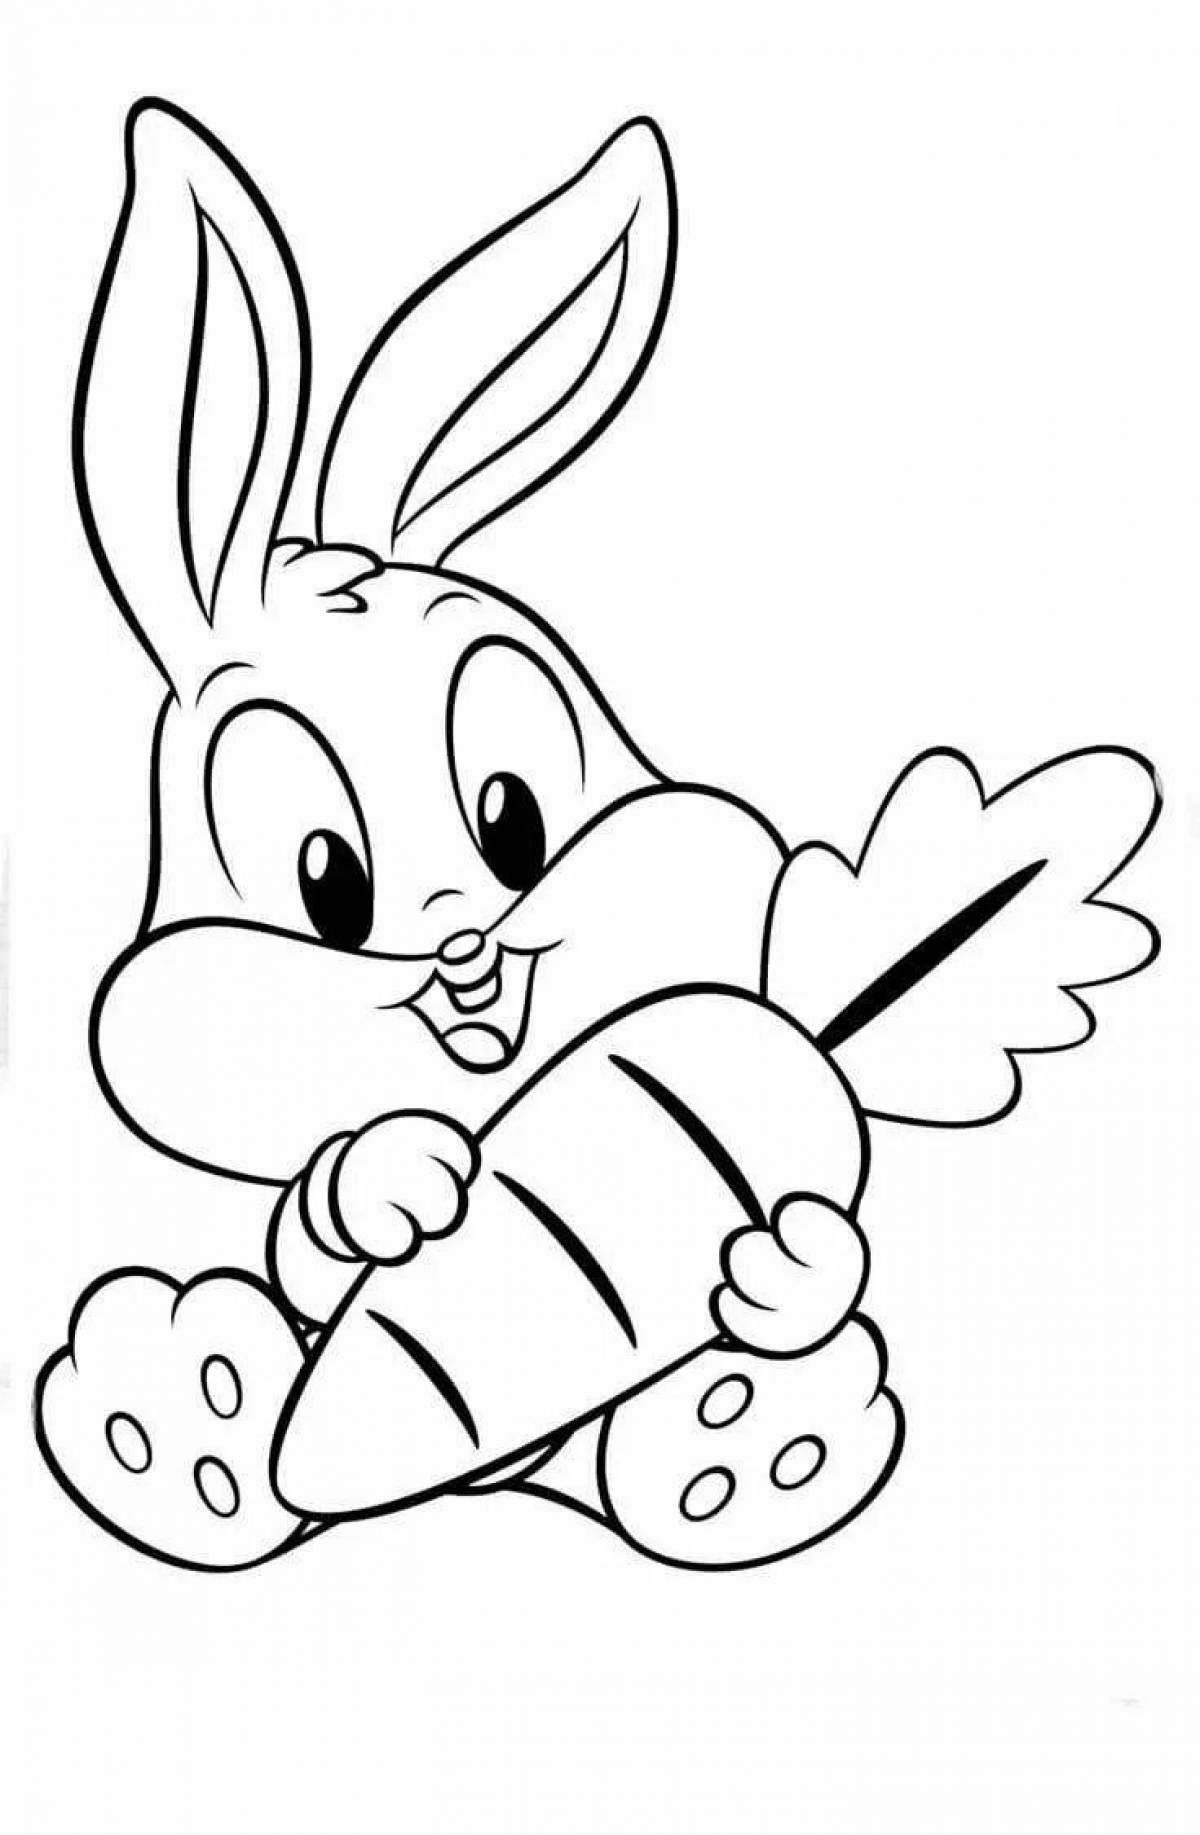 Cute bunny coloring book for kids